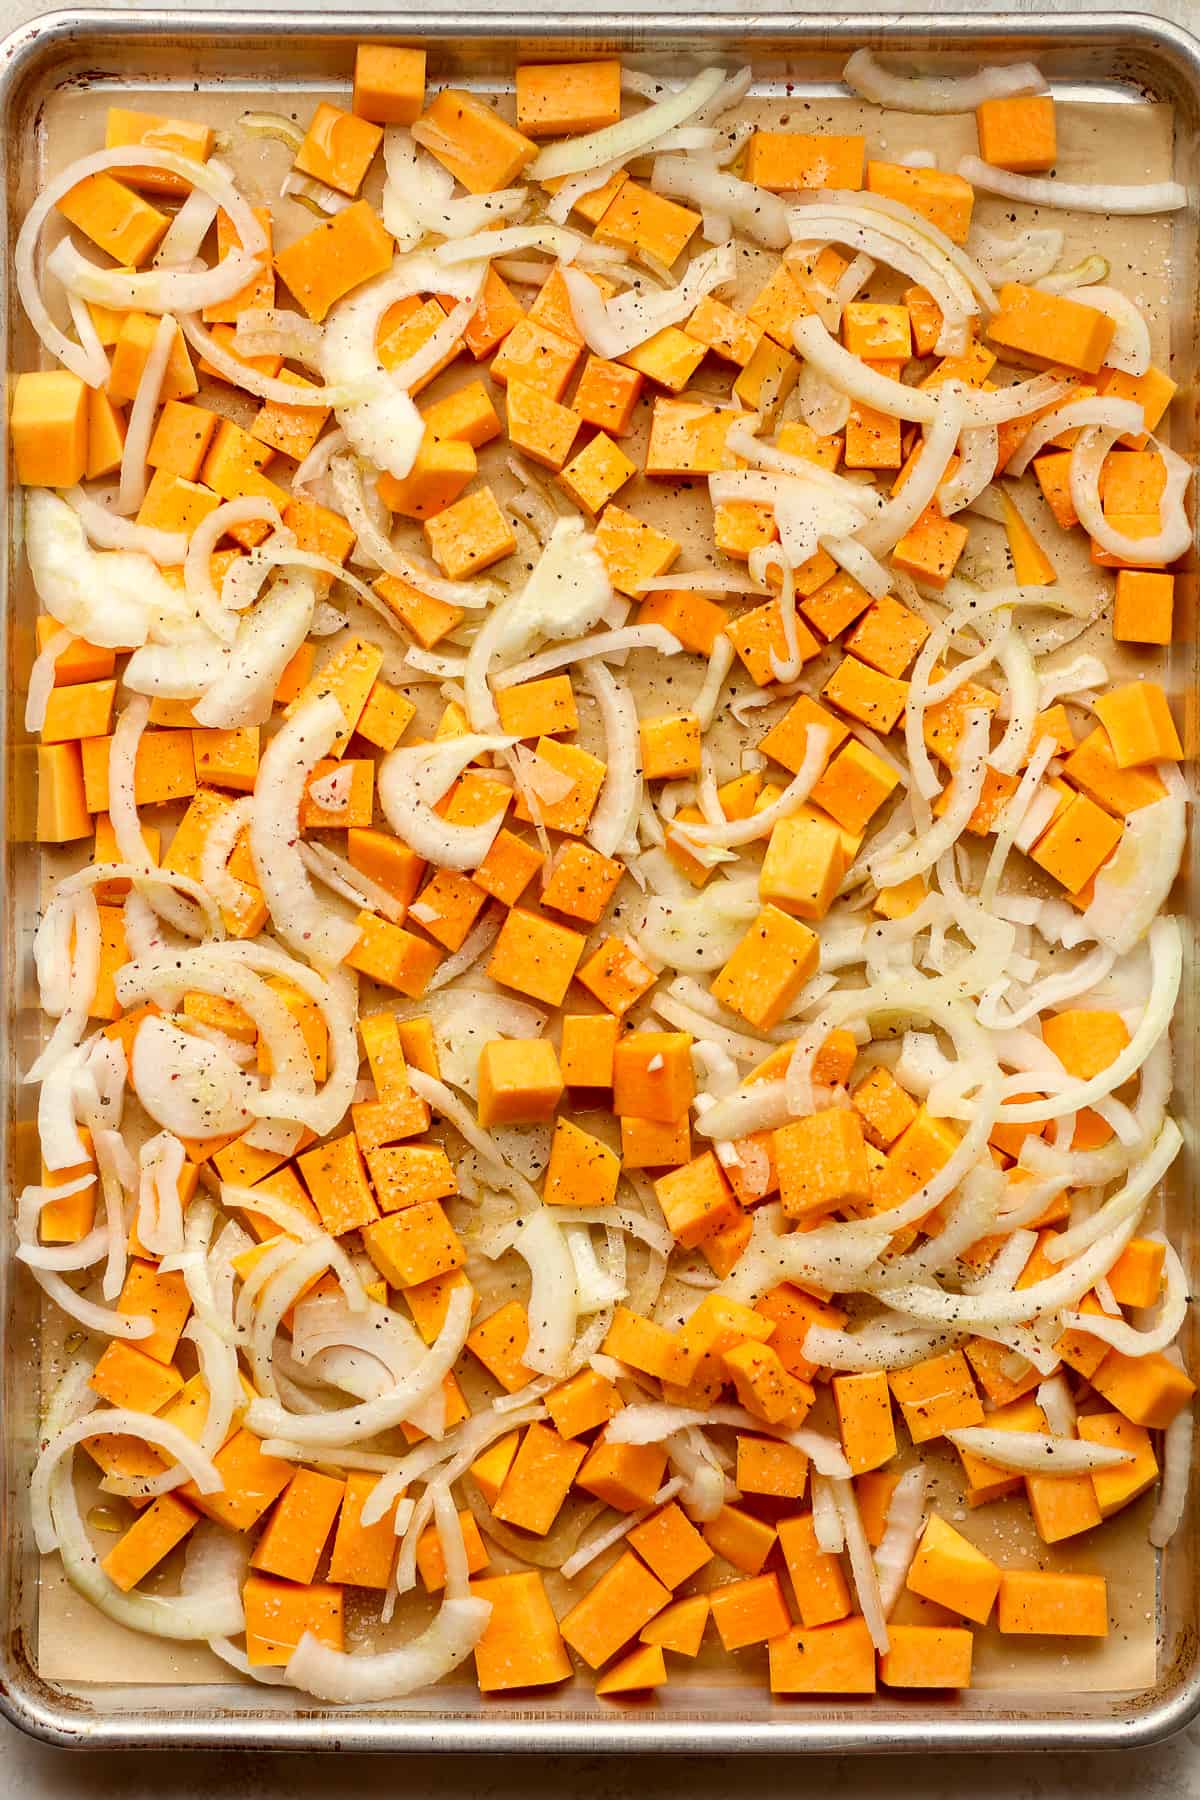 A sheet pan of chopped butternut squash and sliced onions.